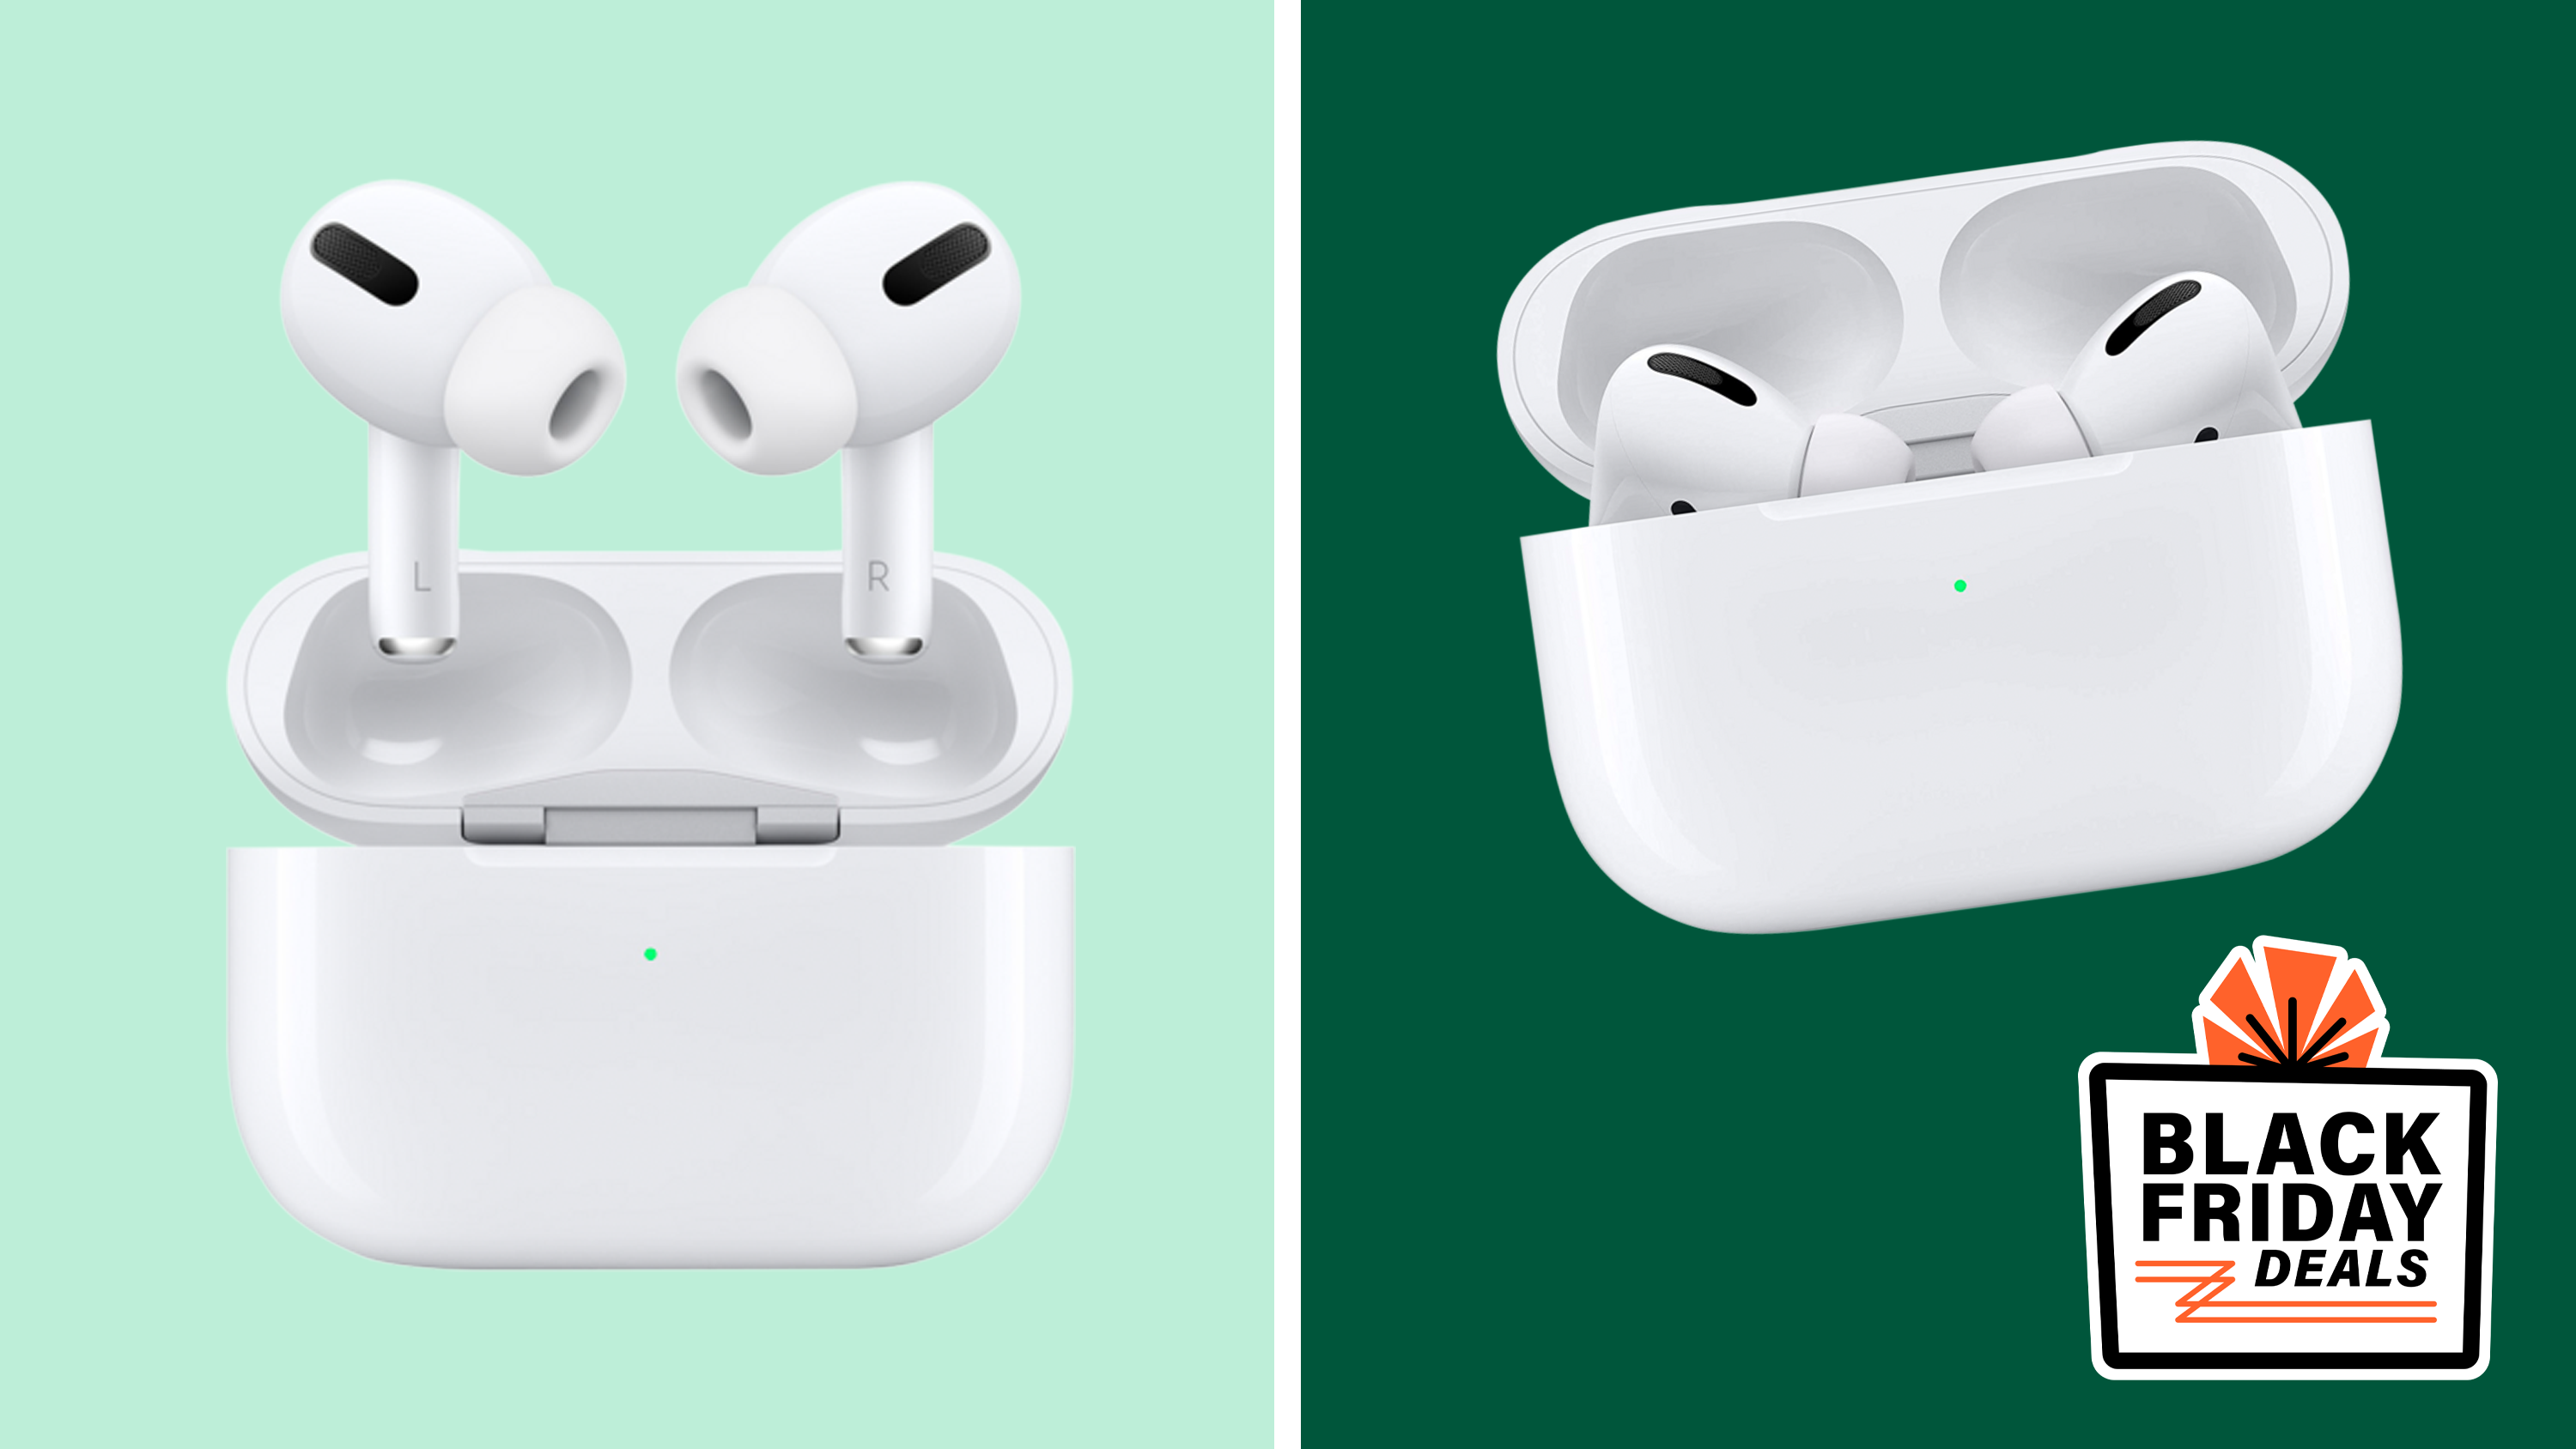 Black Friday 2022: Save 20% on AirPods Pro 2 at Amazon